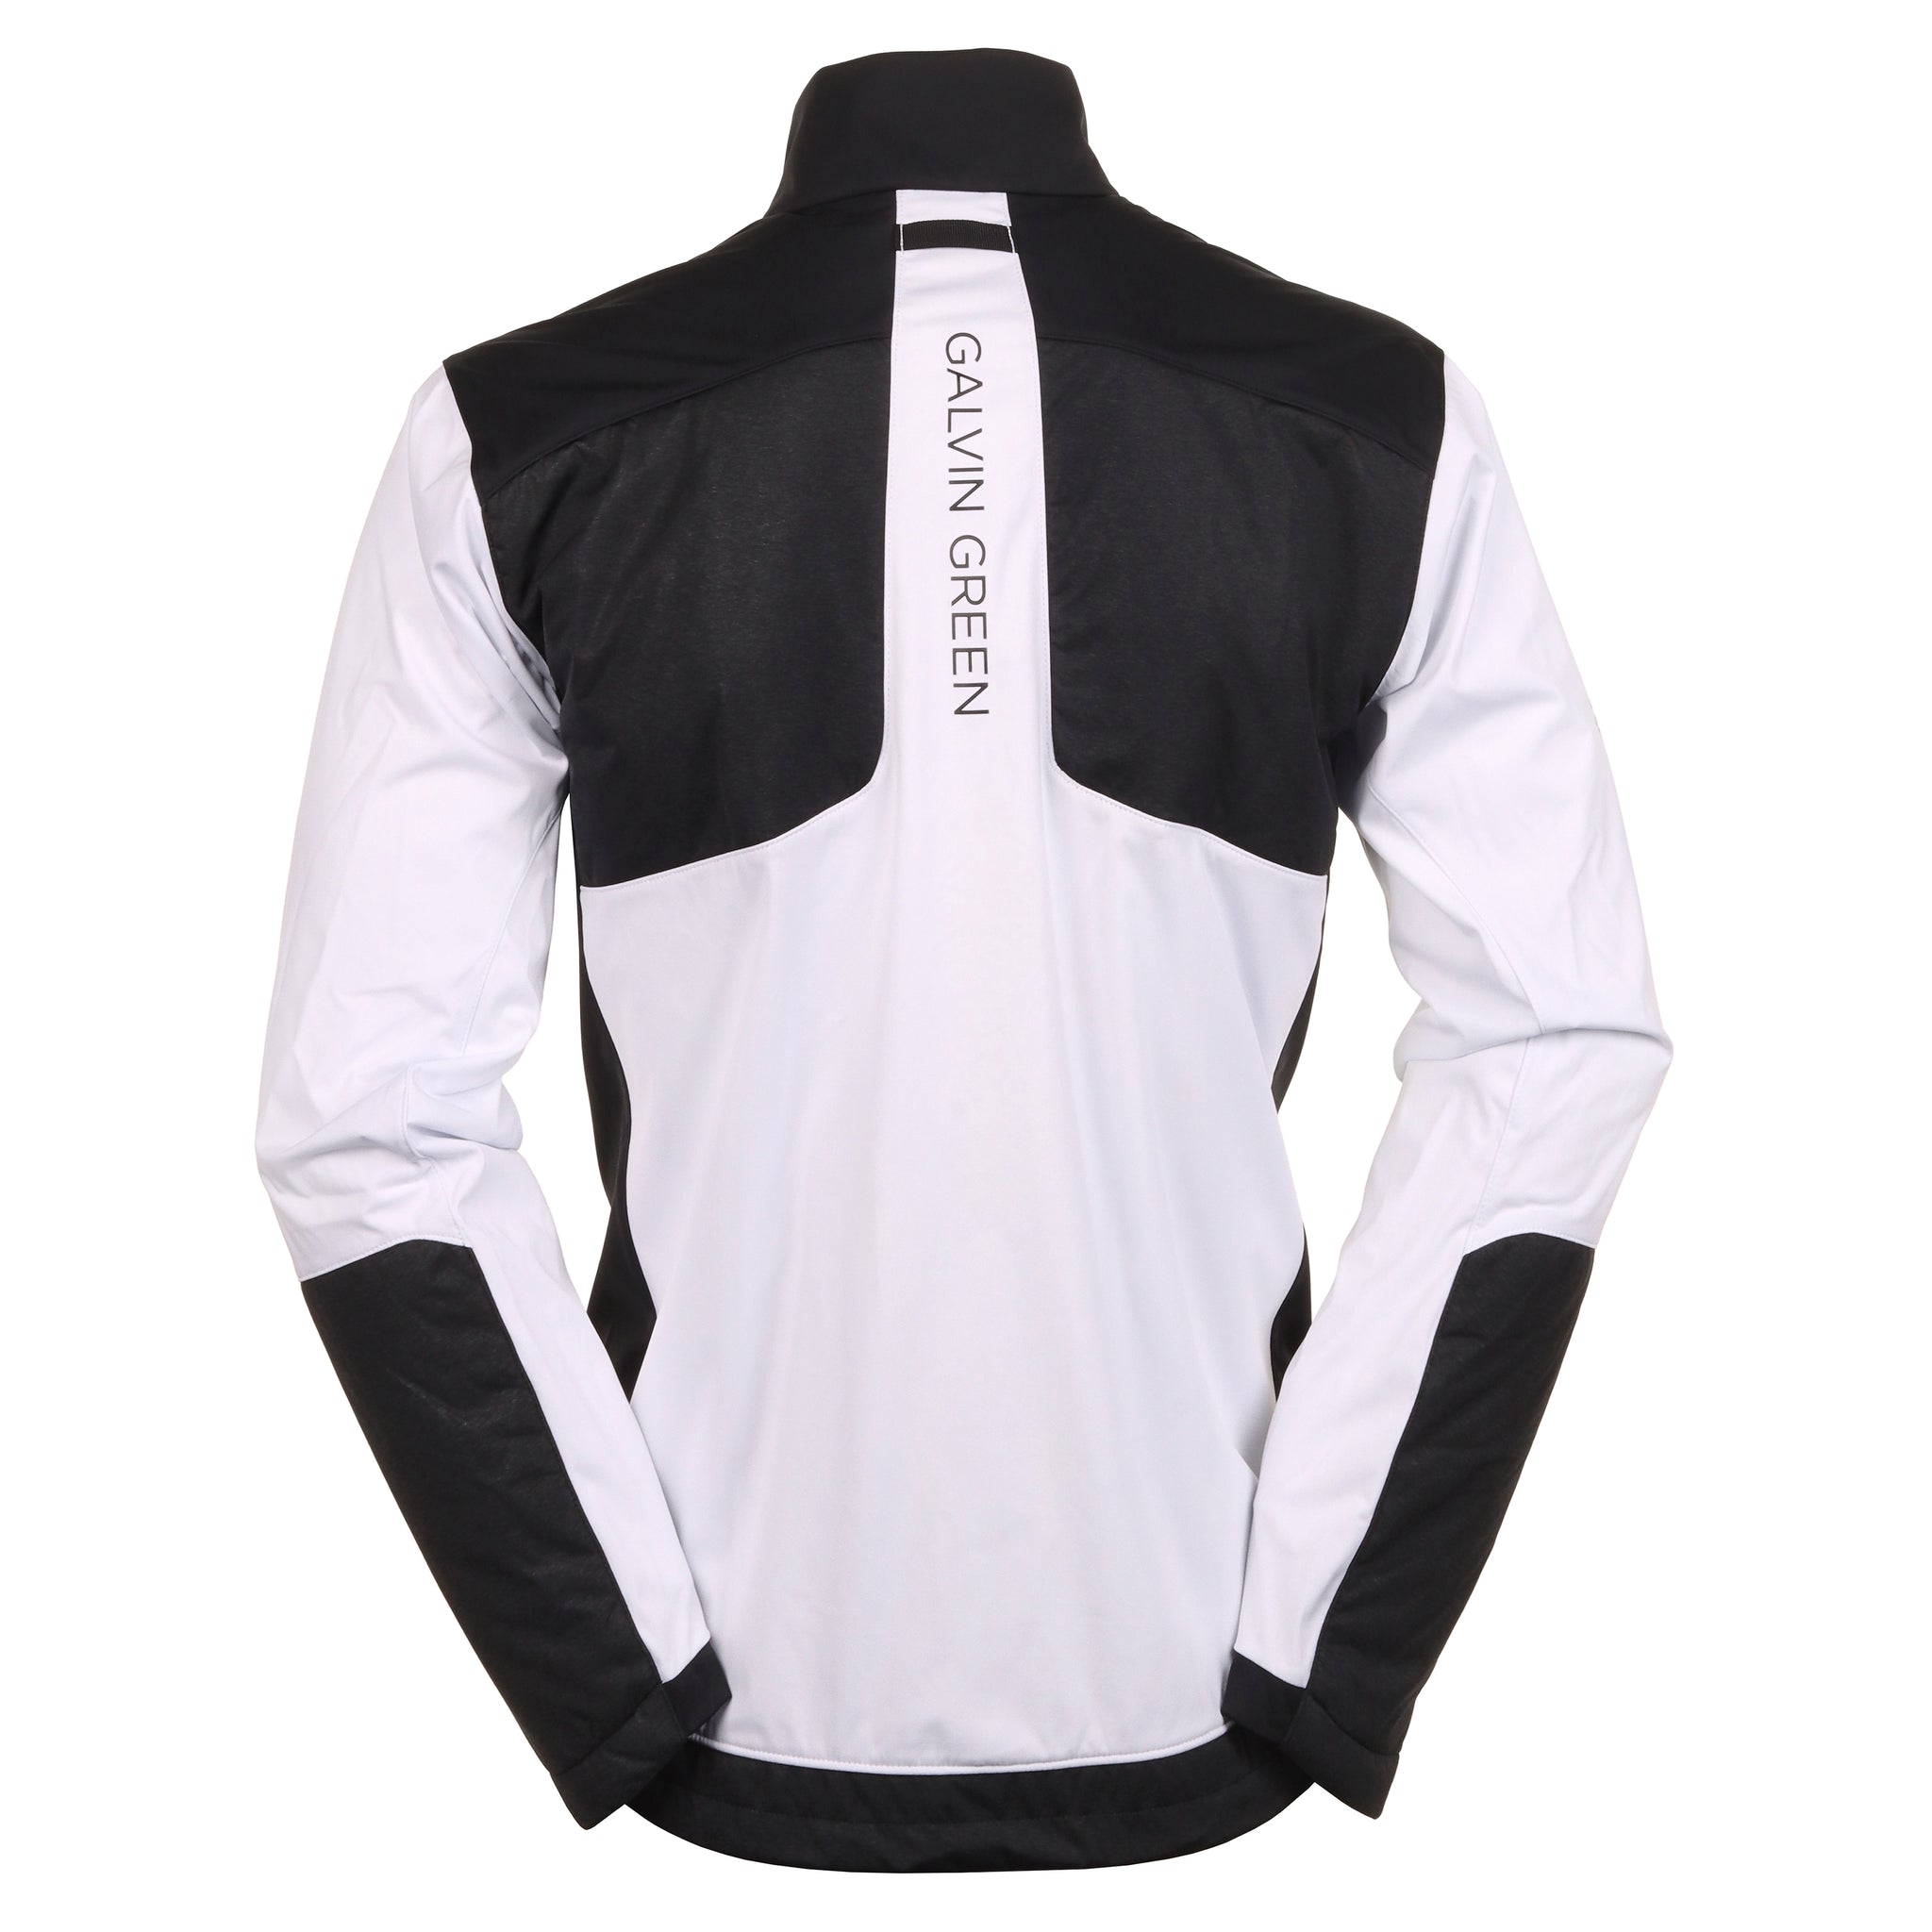 Galvin Green Layton Interface-1 Thermore Jacket